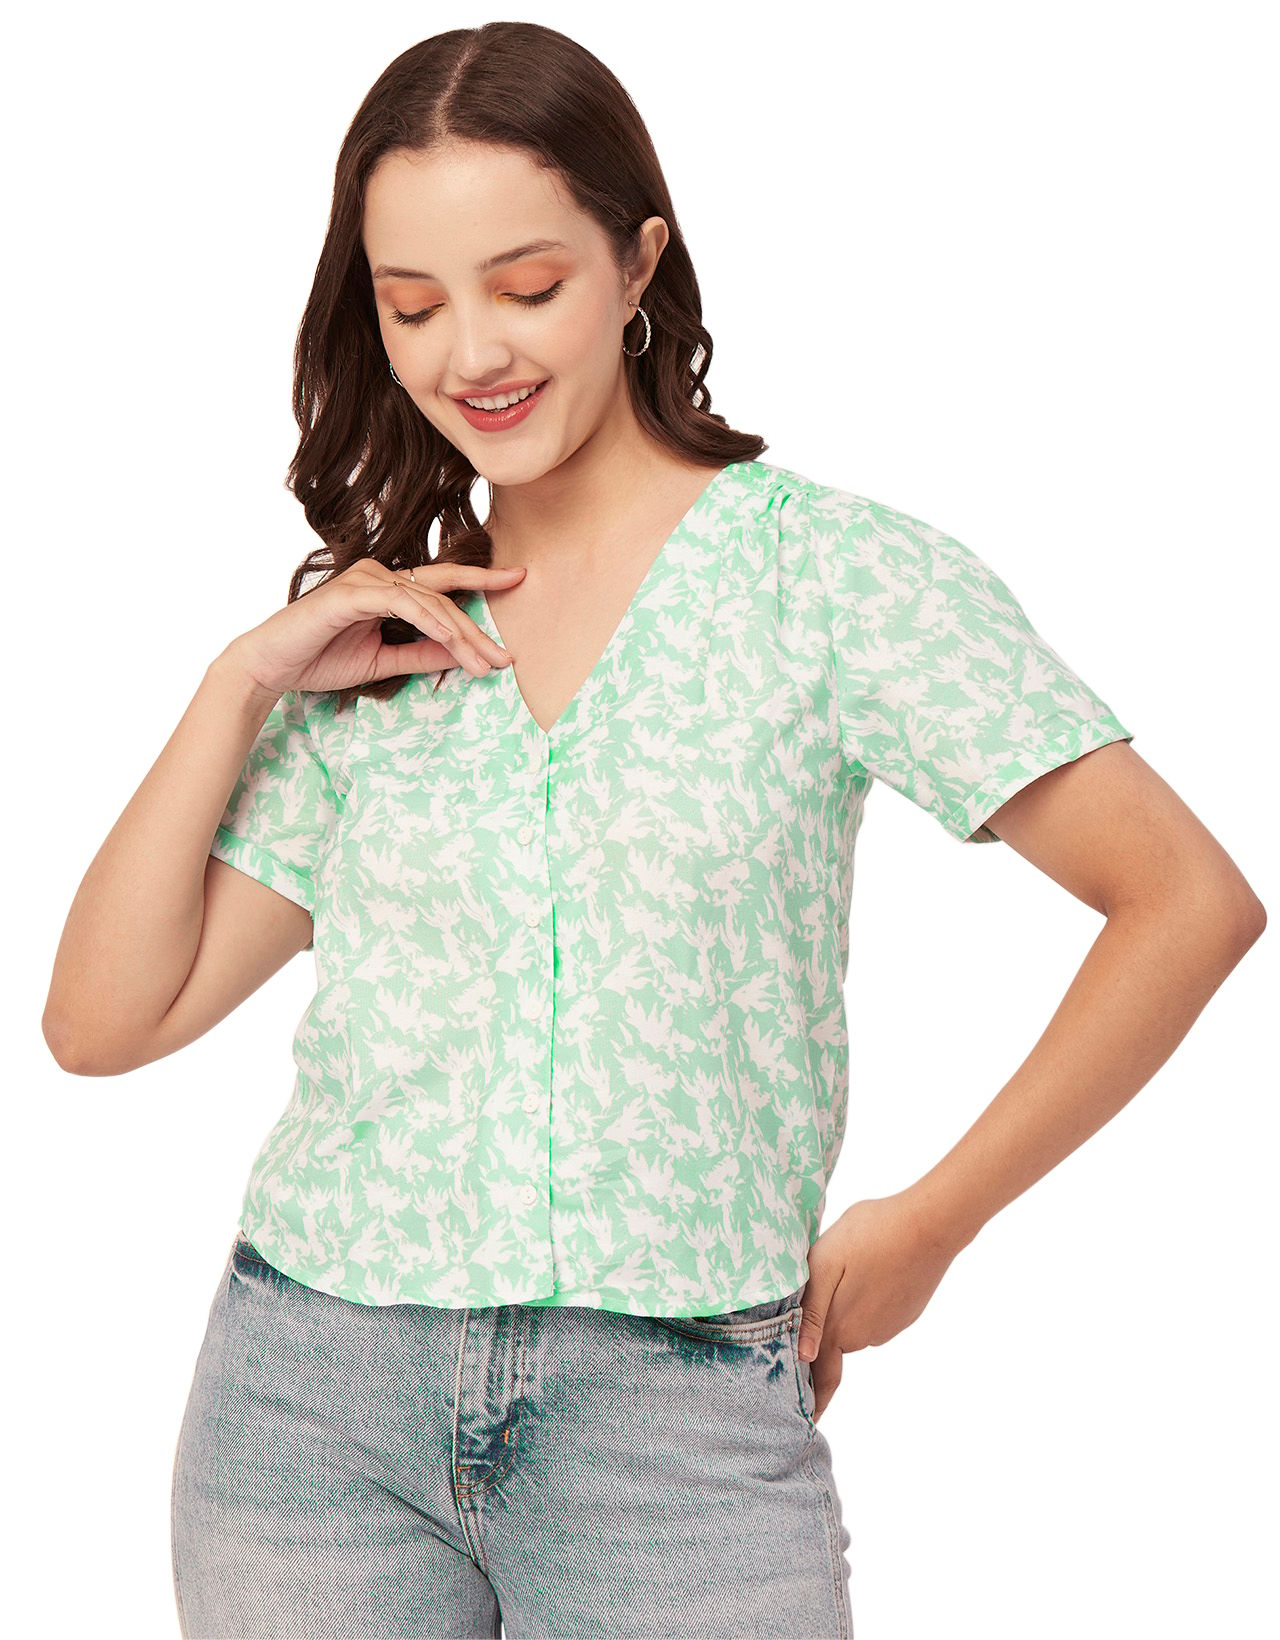 Moomaya V-Neck Printed Tops For Women, Button Down Short Sleeve Crop Top Blouse